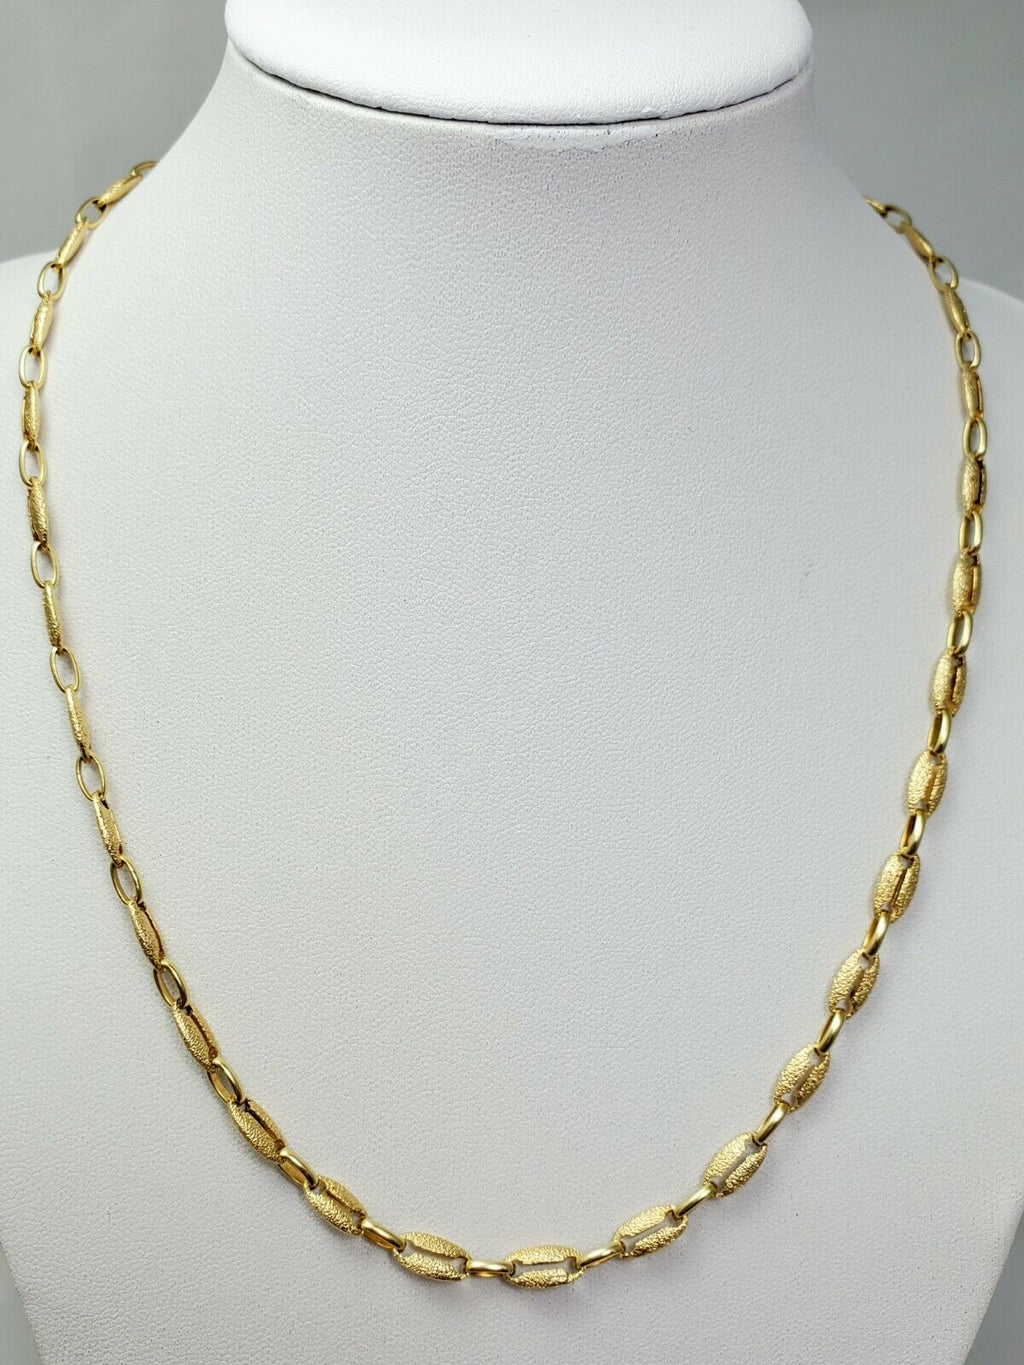 18" Solid 14k Yellow Gold Link Necklace Chain Italy